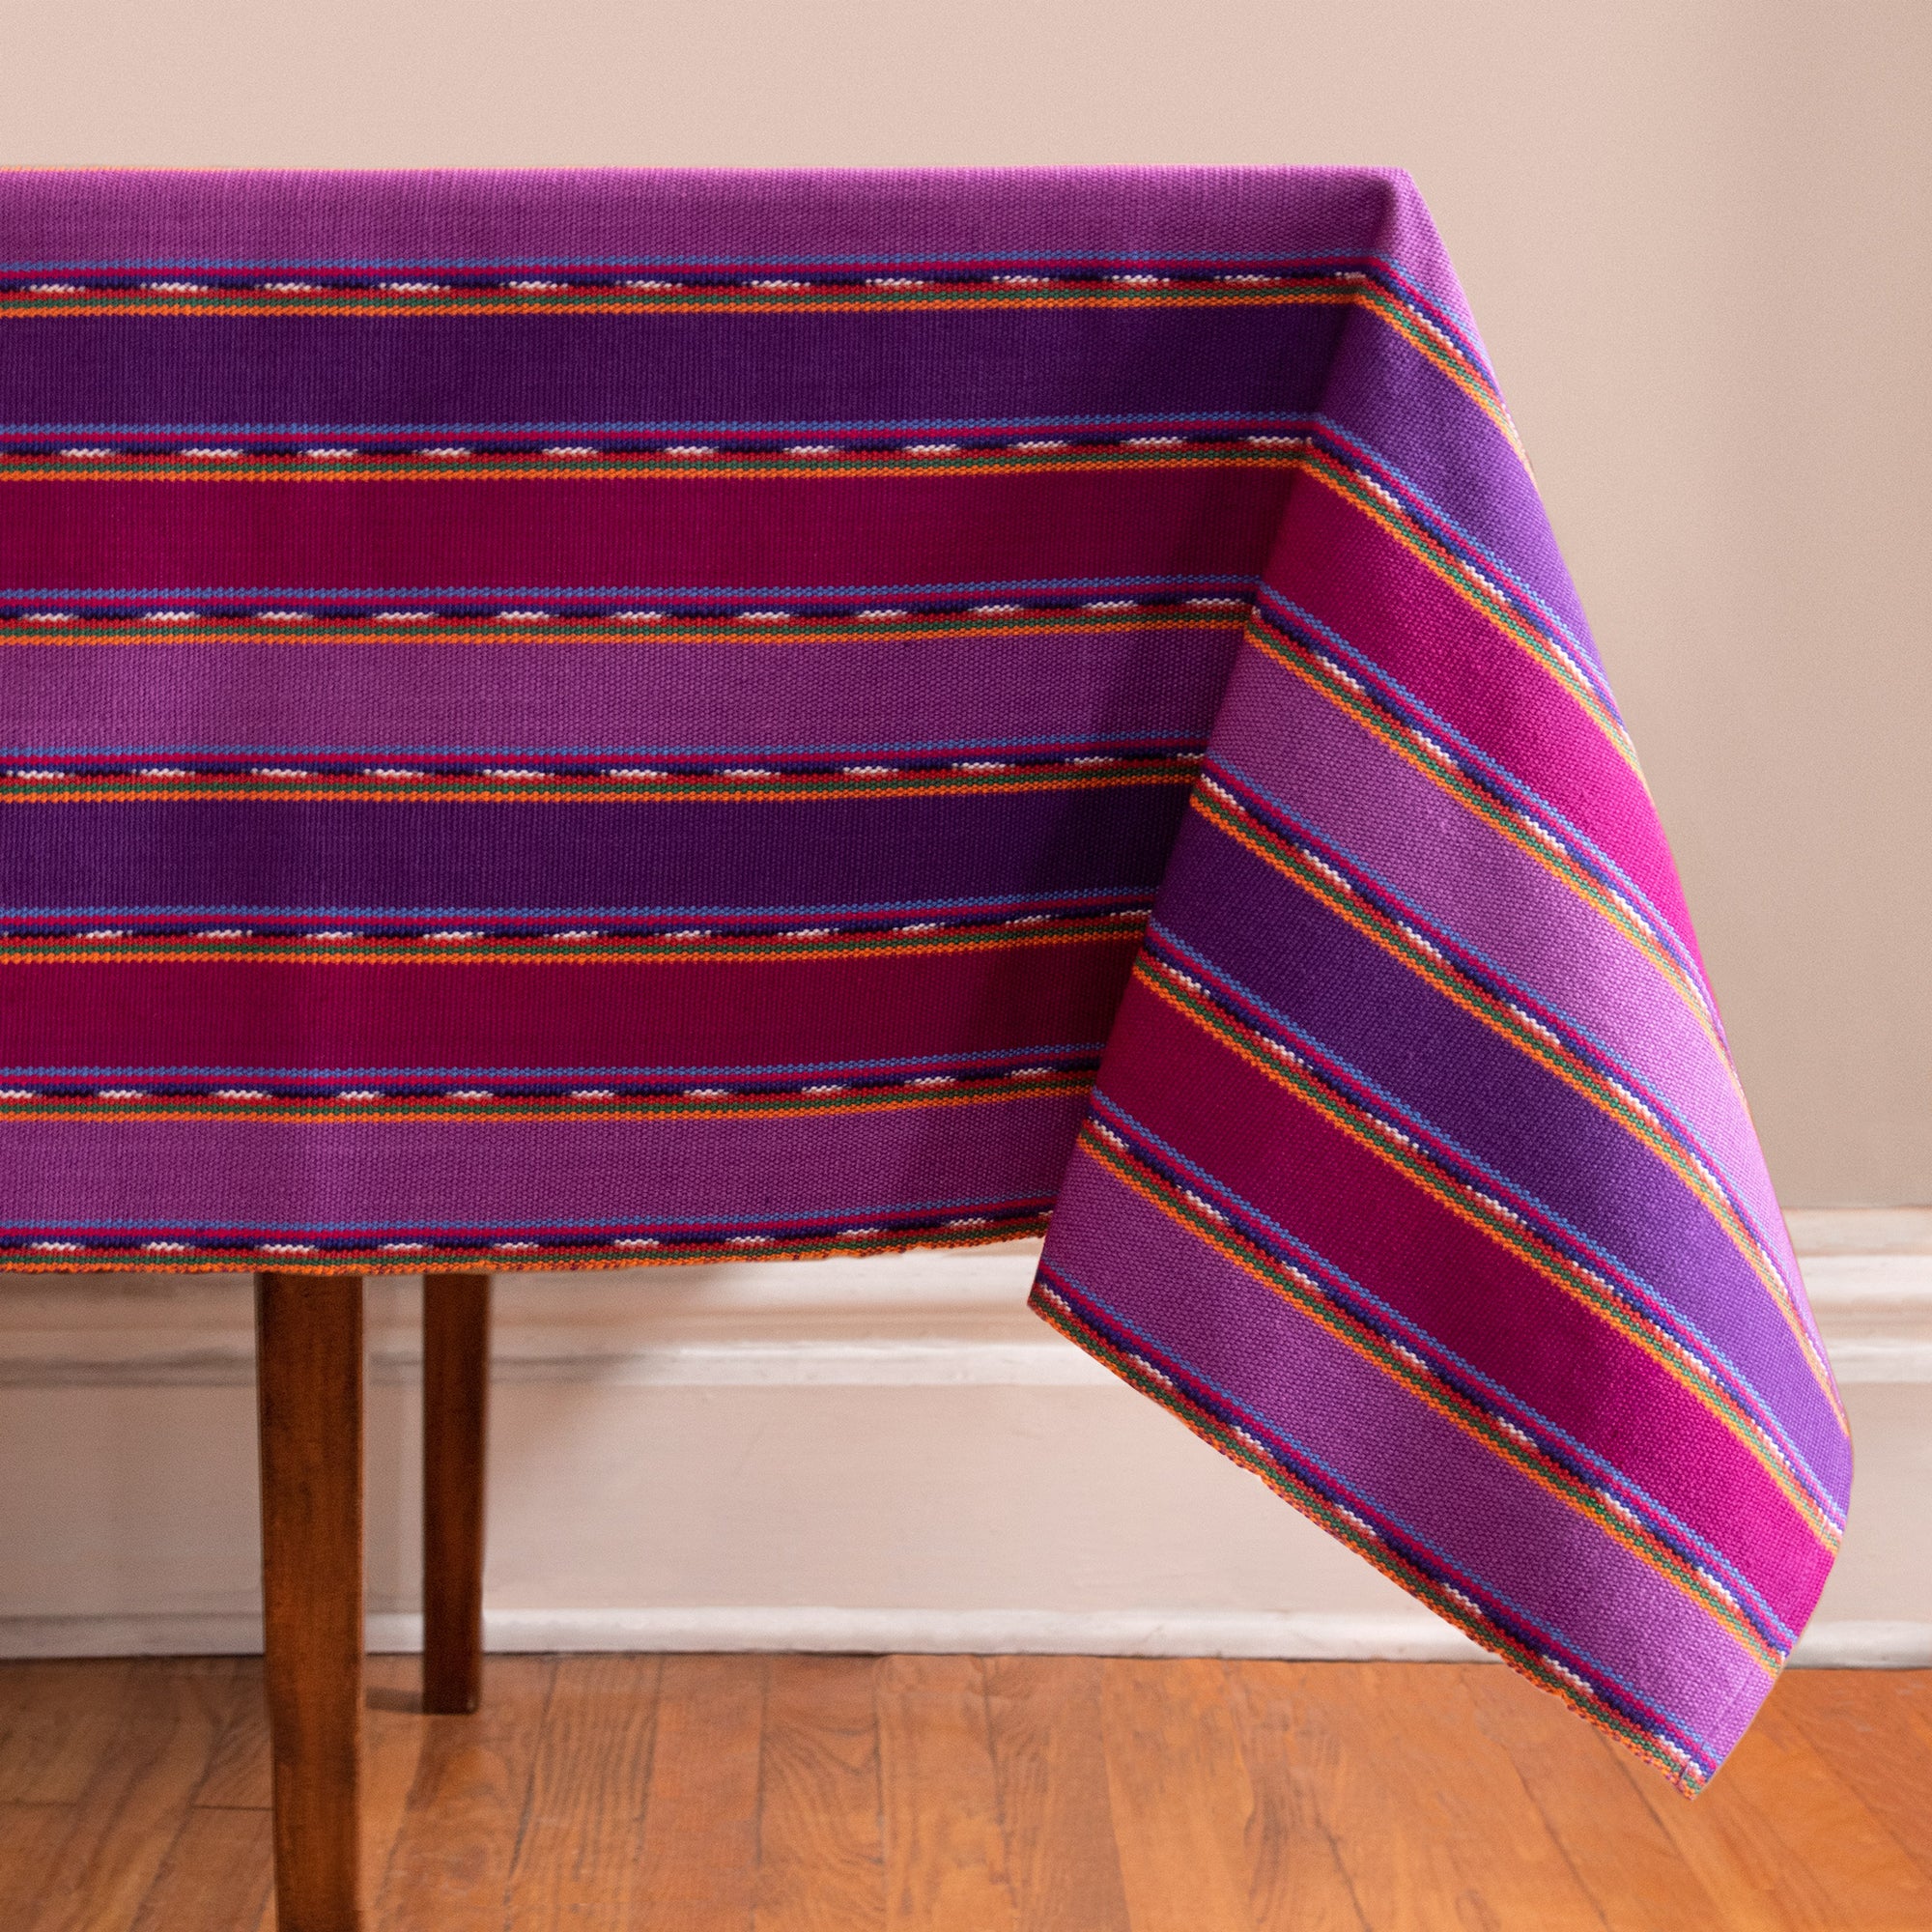 Striped Handwoven tablecloth in purples